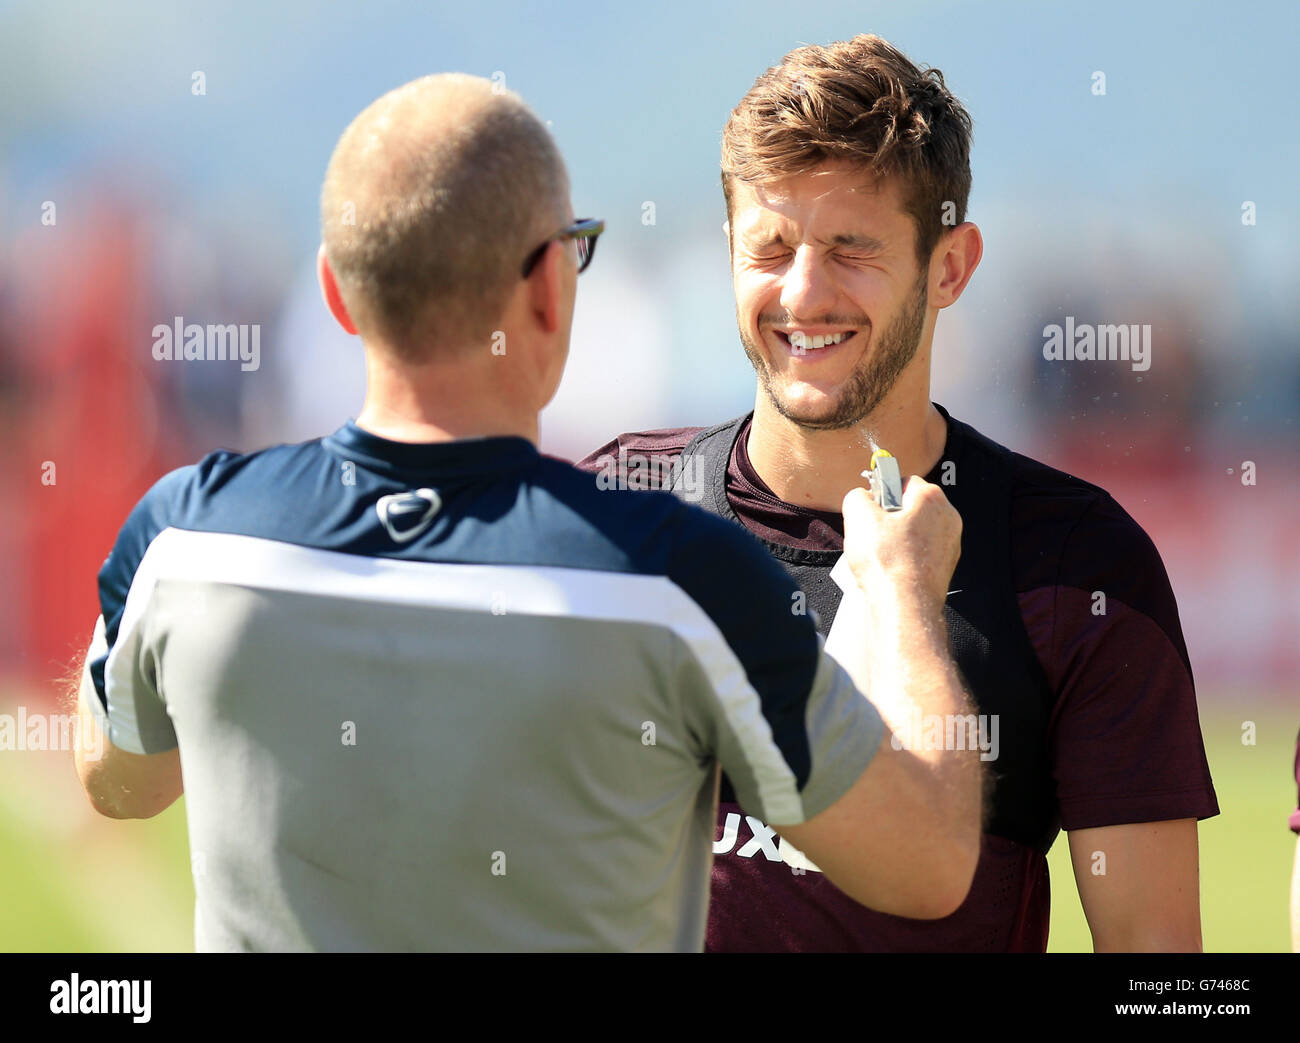 Soccer - FIFA World Cup 2014 - Group D - England v Italy - England Training Session and Press Conference - Urca Military Trai.... England's Adam Lallana is sprayed with water during the training session at Urca Military Training Ground, Rio de Janeiro, Brazil. Stock Photo